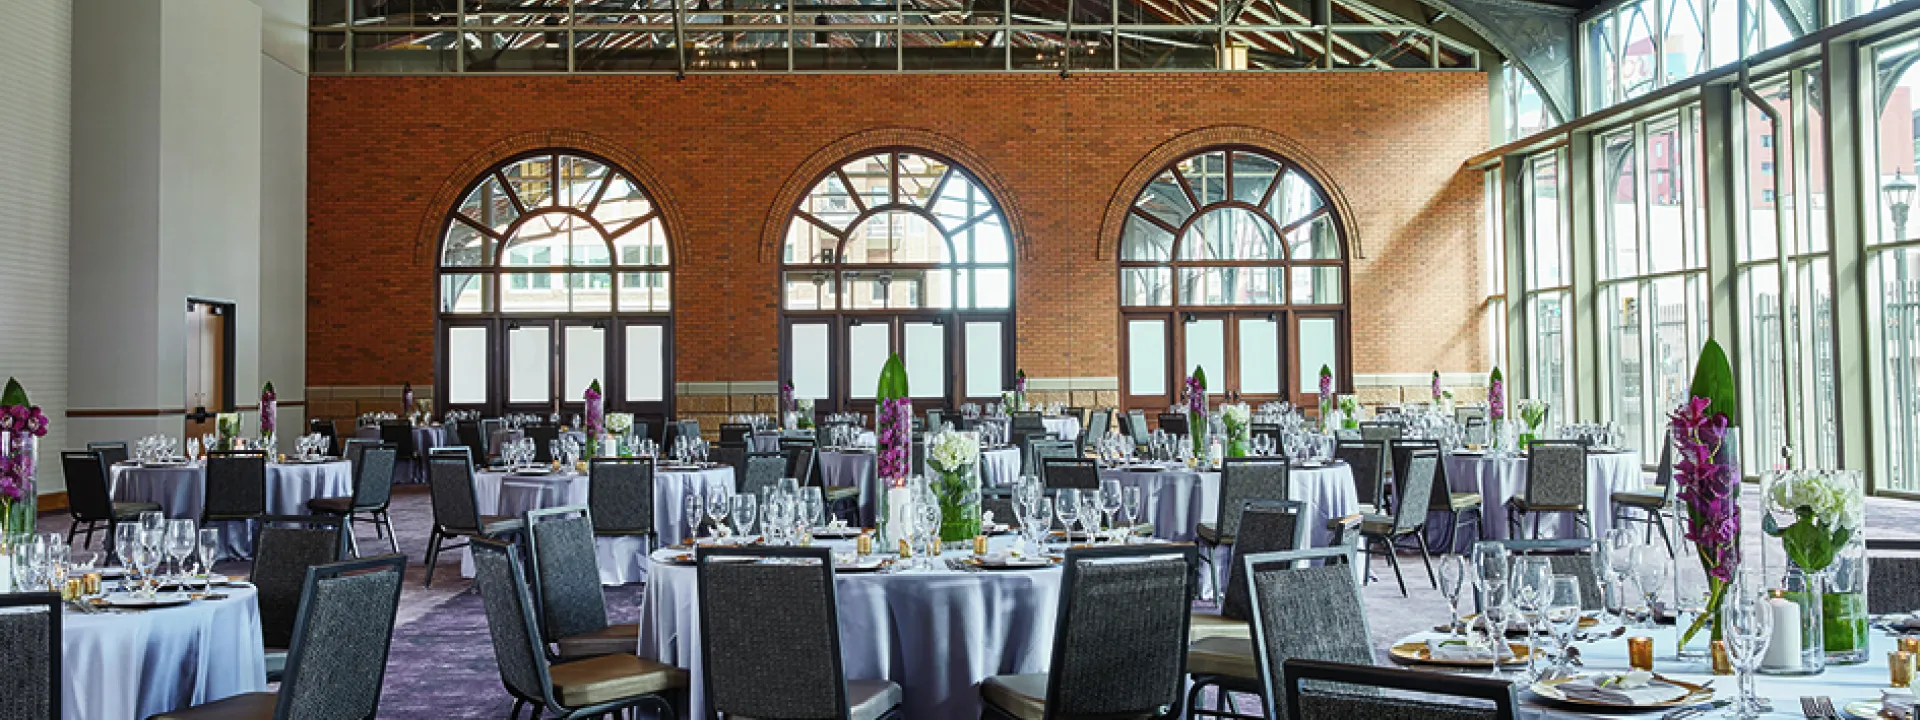 The Great Northern Ballroom, part of the 20,000 square foot expansion at Minneapolis wedding venue The Depot.